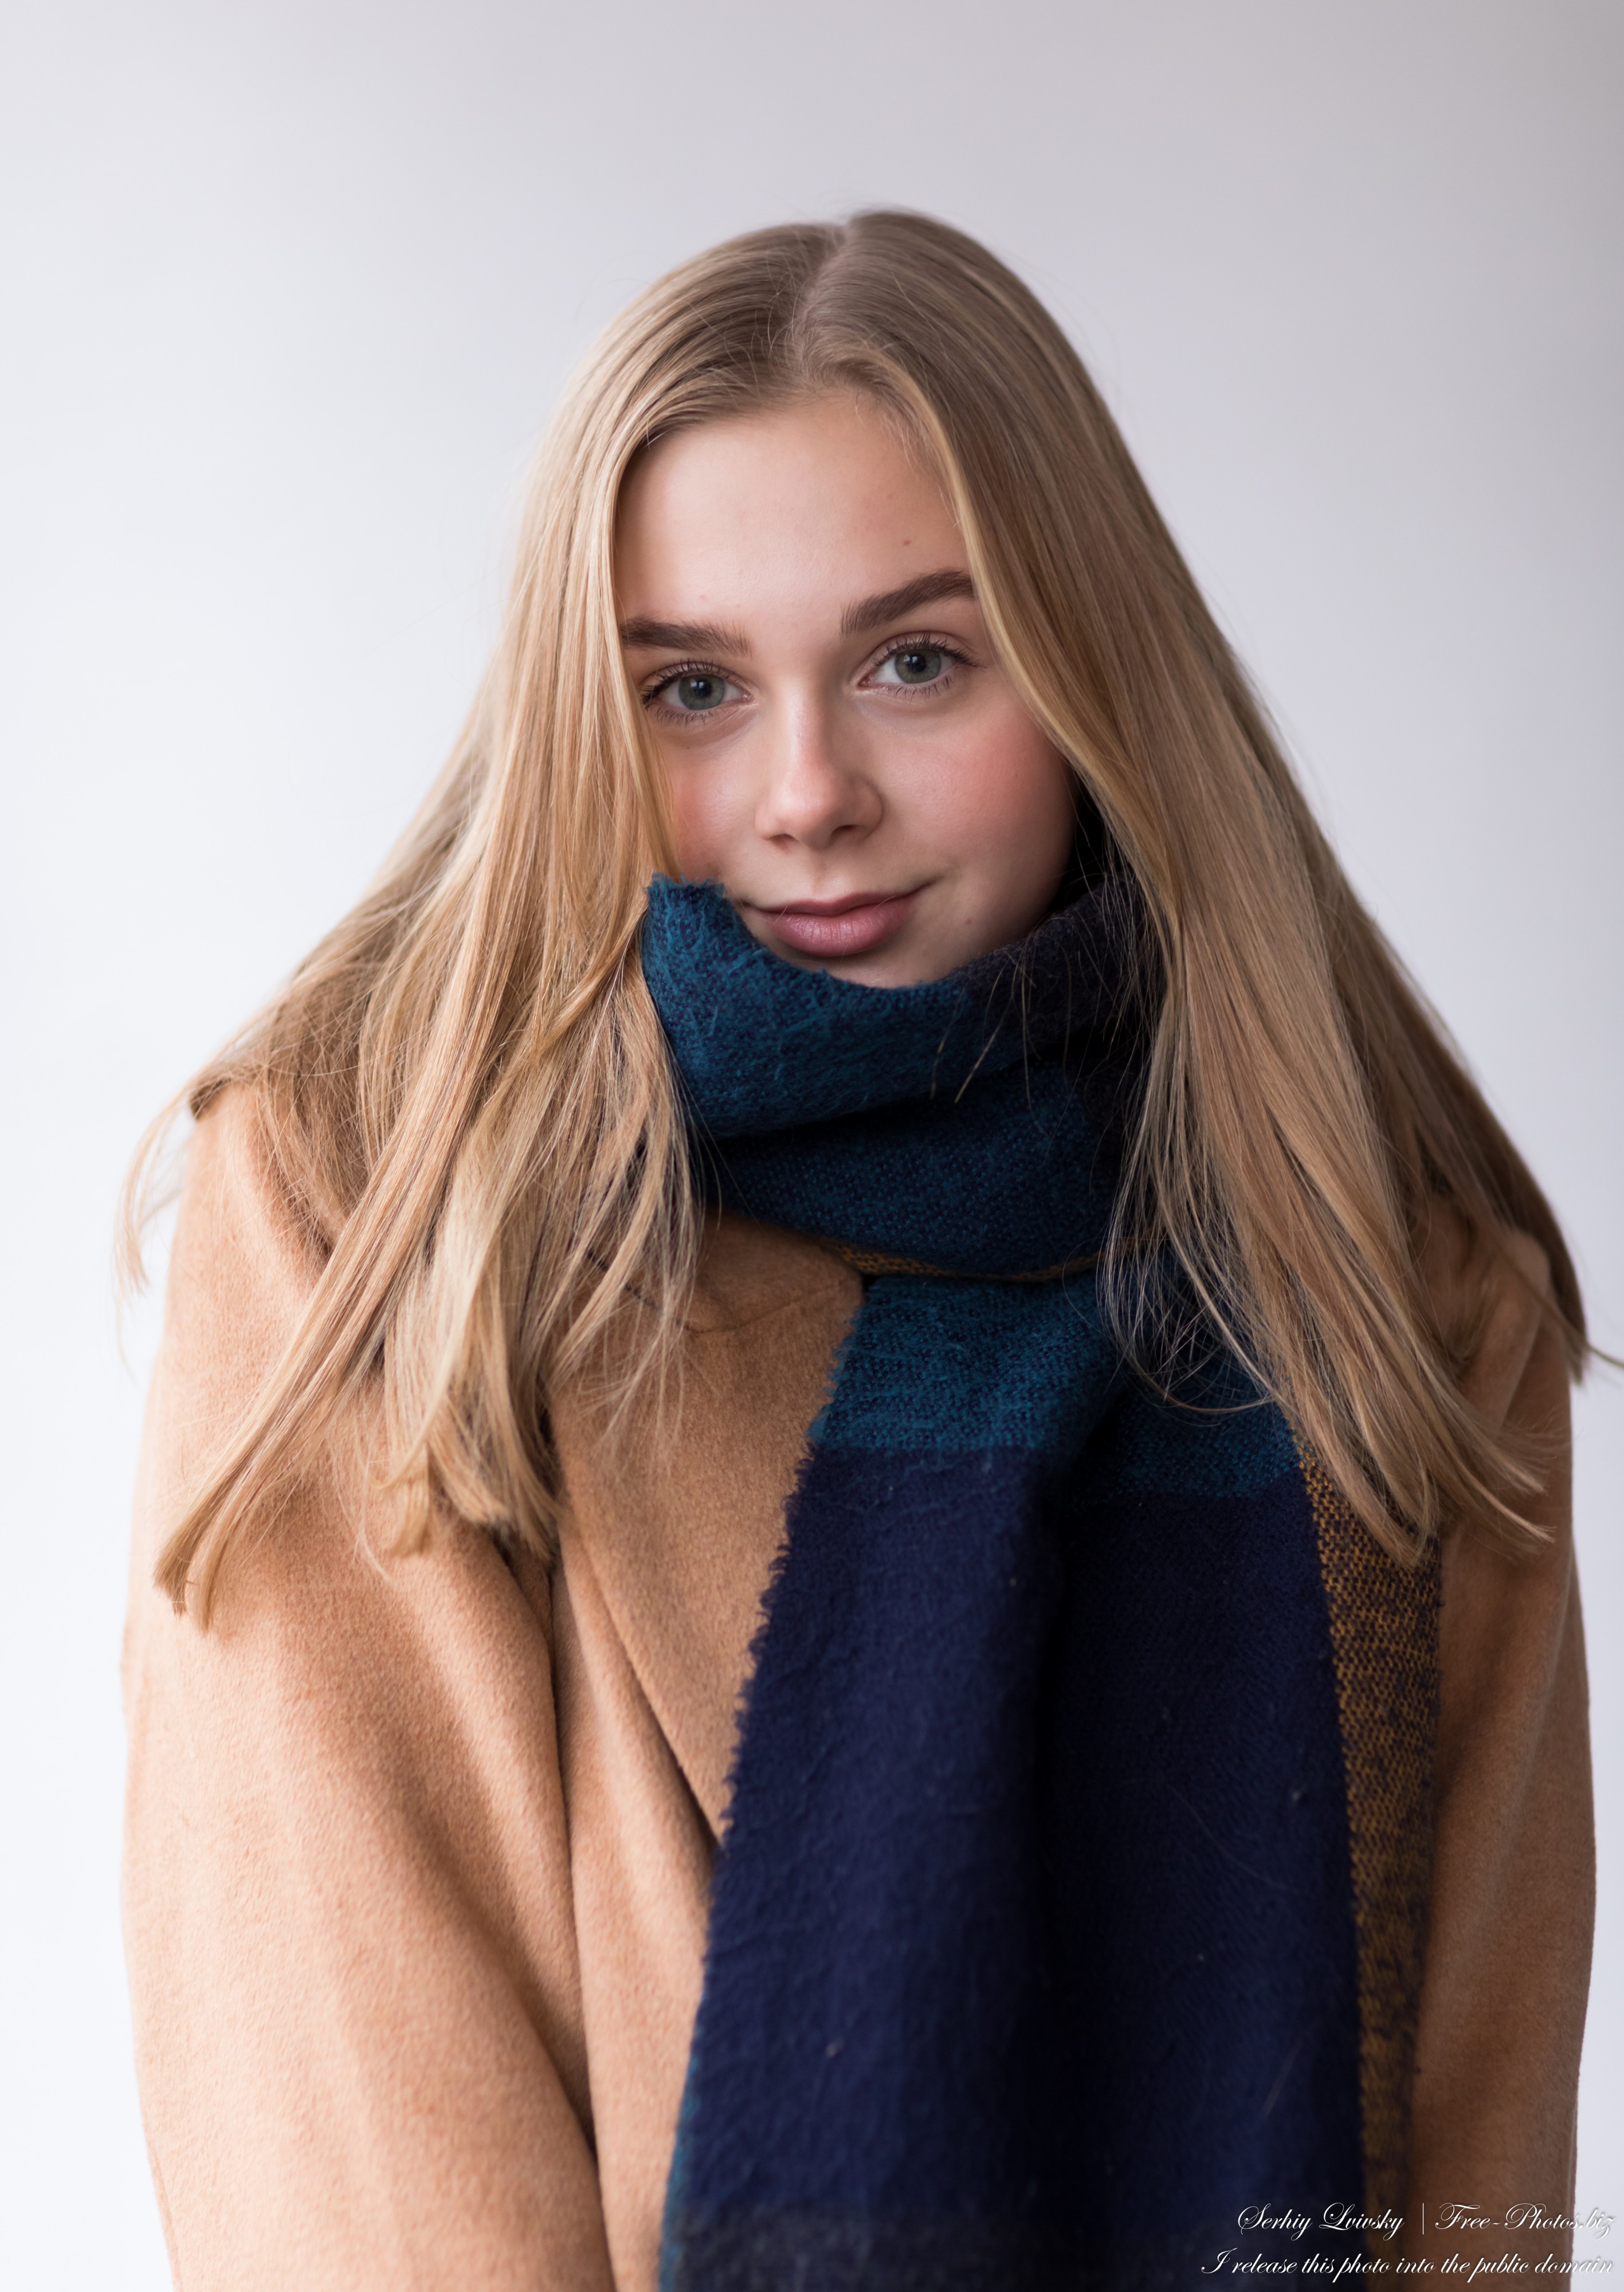 Emilia - a 15-year-old natural blonde Catholic girl photographed in November 2020 by Serhiy Lvivsky, picture 12